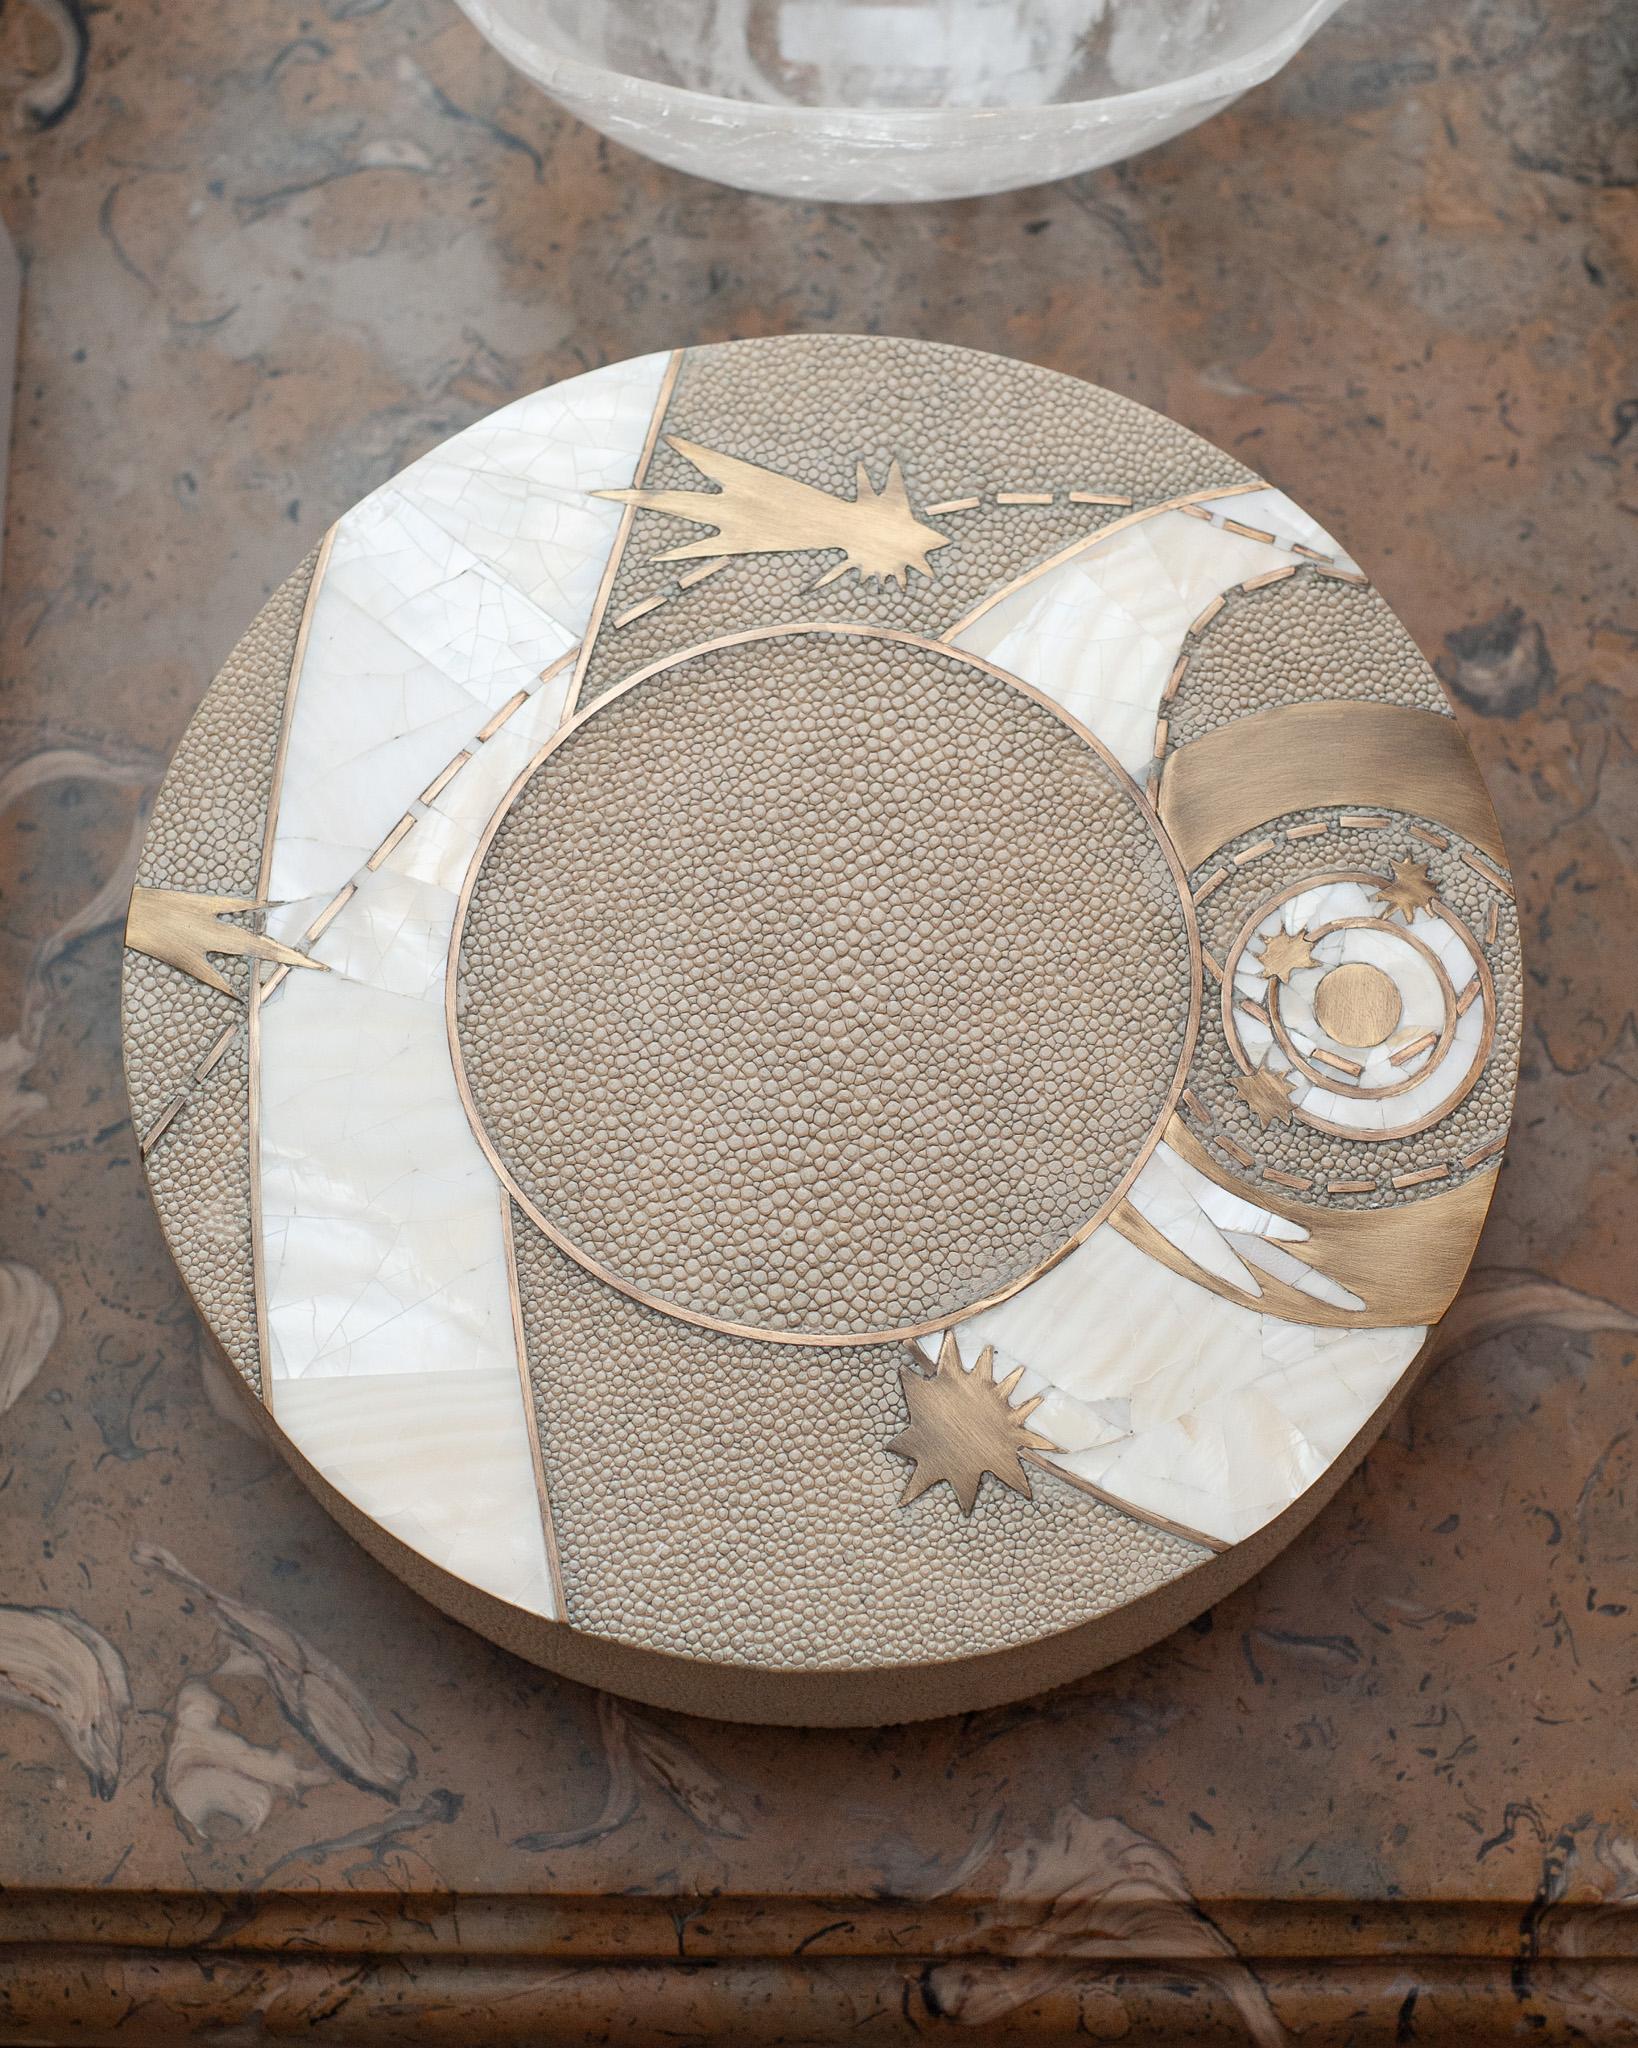 In stock now - A gorgeous Kifu Paris decorative box in creme shagreen over a base of walnut, with brass, creme shagreen and white shell inlay lid. Expertly crafted in a celestial motif, this decorative box is a perfect accessory for any table and is